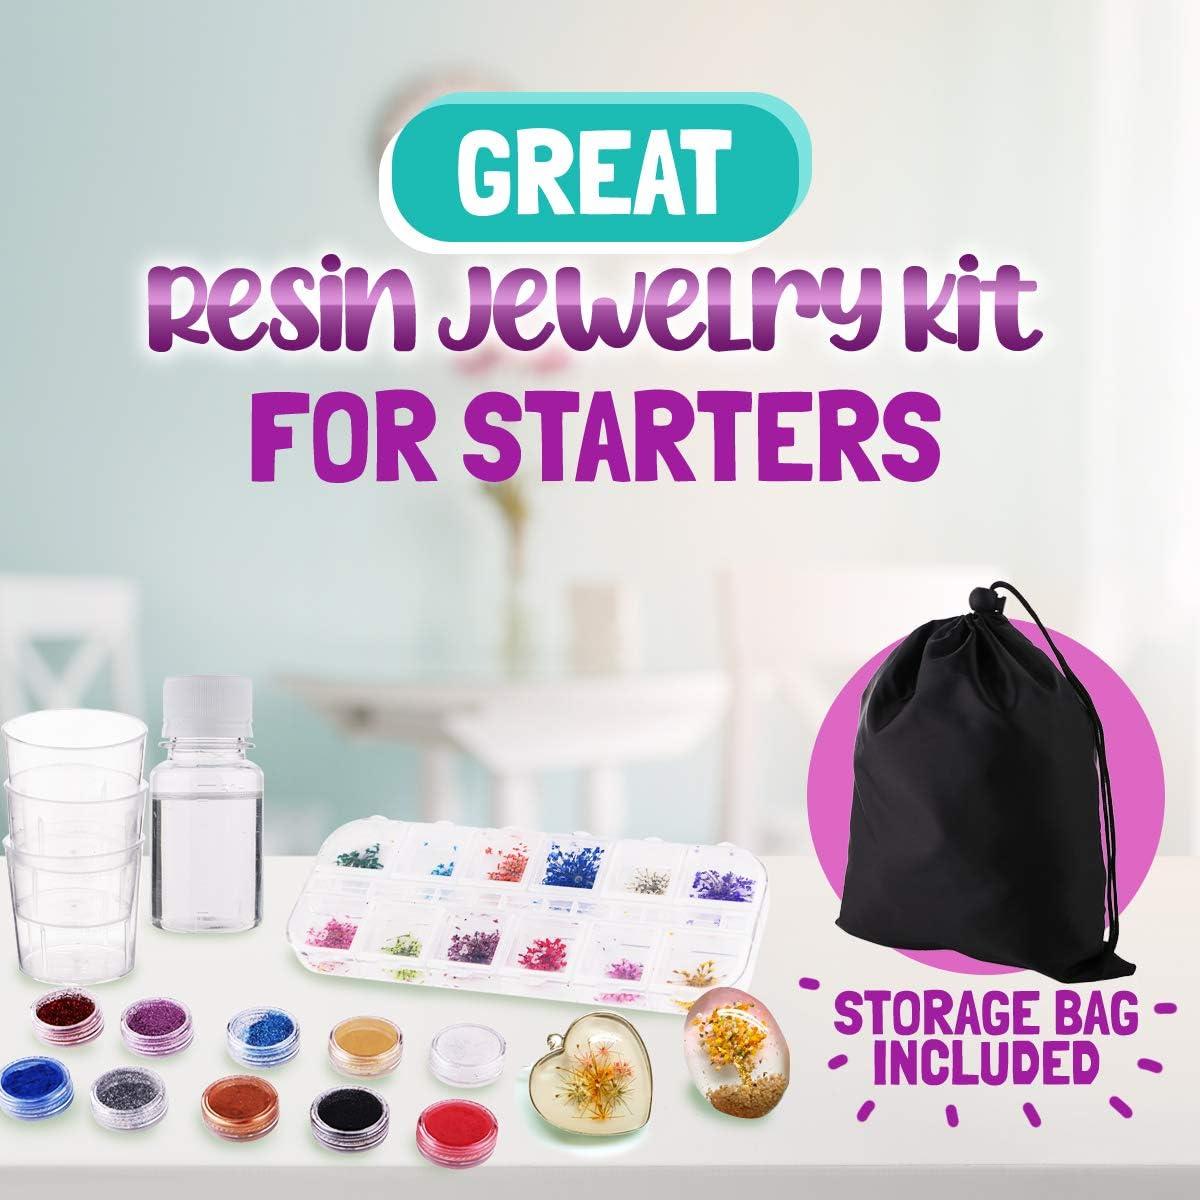 Epoxy Resin Kit for Beginners,Jewelry Making Starter Kit with silicone  Molds